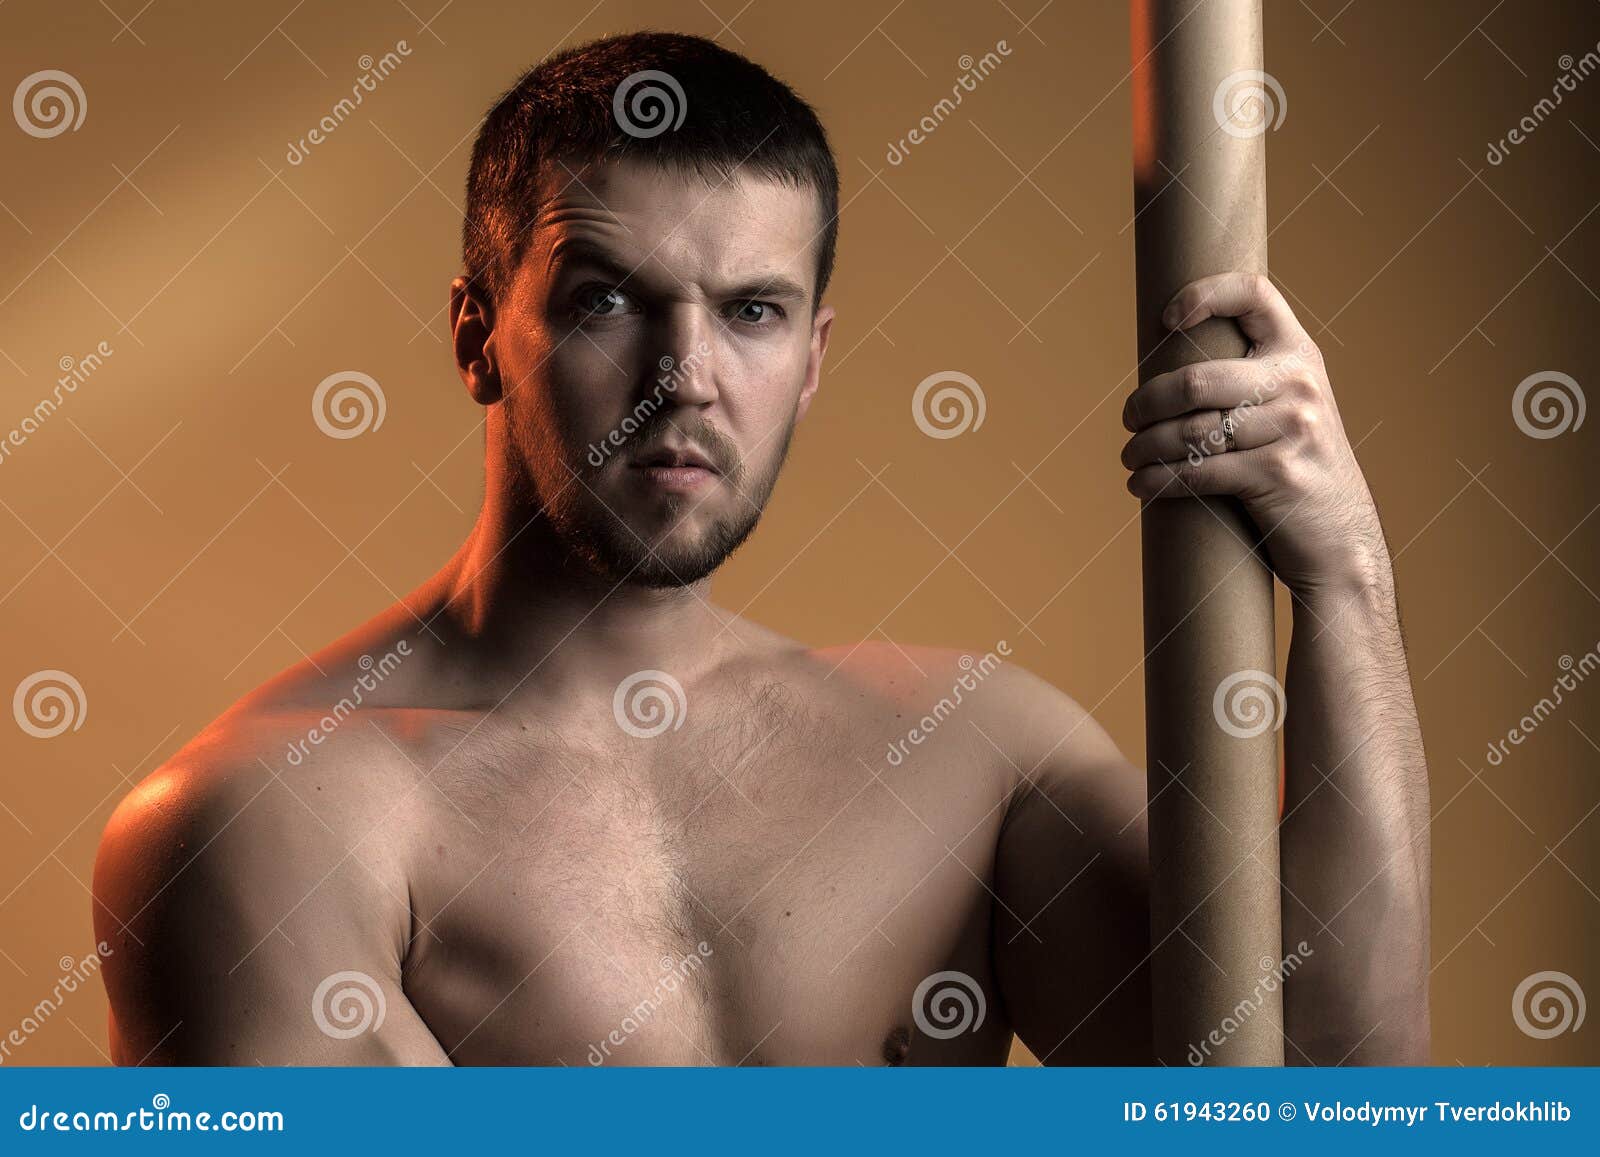 Muscular man with crossbar stock photo. Image of pectoral - 61943260